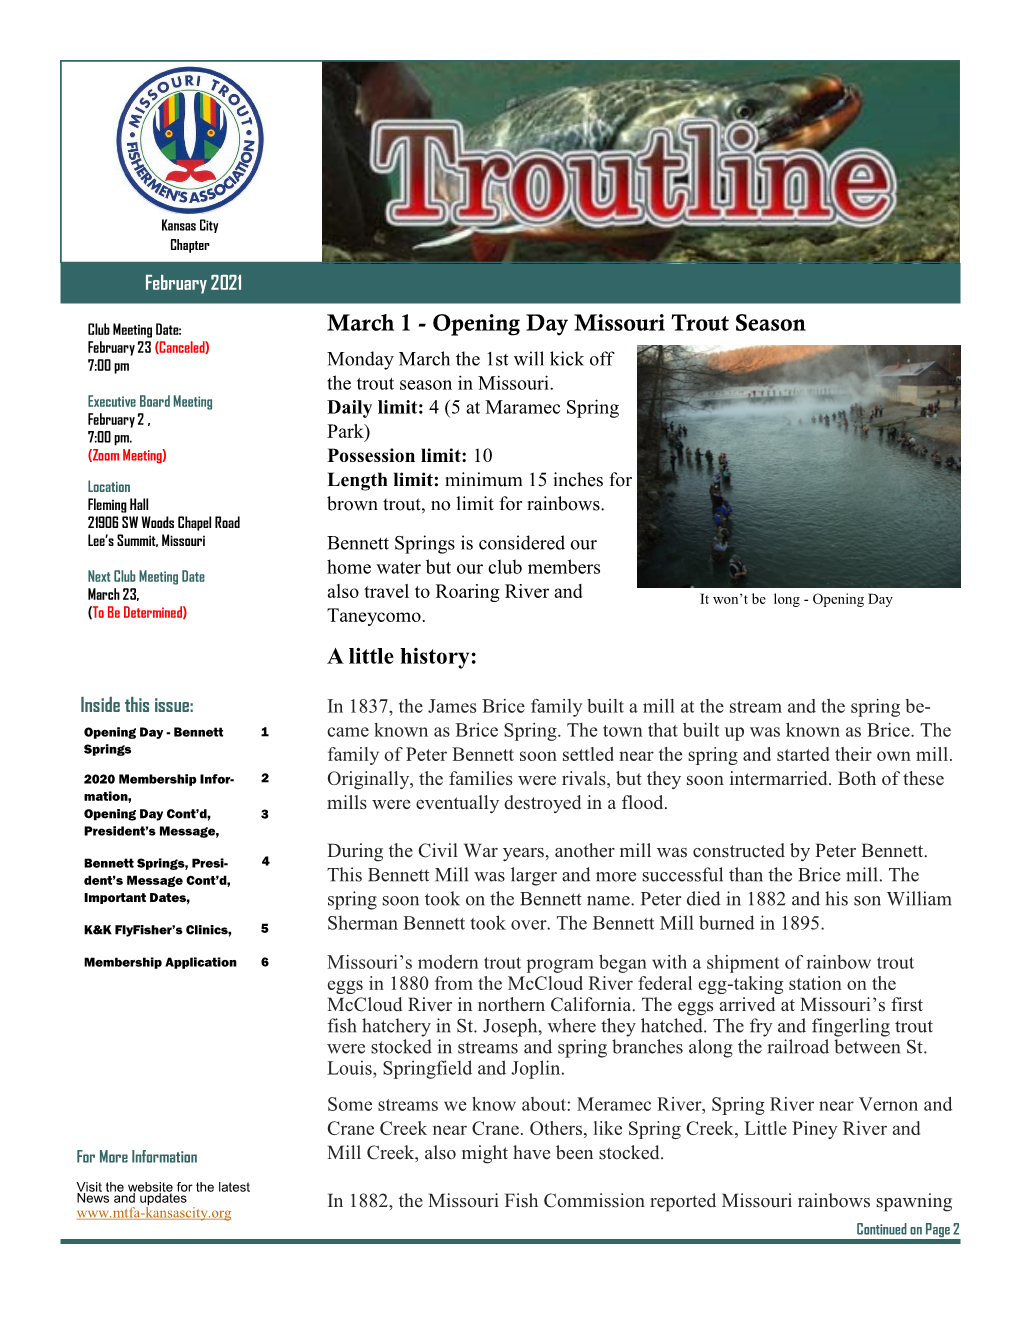 March 1 - Opening Day Missouri Trout Season February 23 (Canceled) 7:00 Pm Monday March the 1St Will Kick Off the Trout Season in Missouri